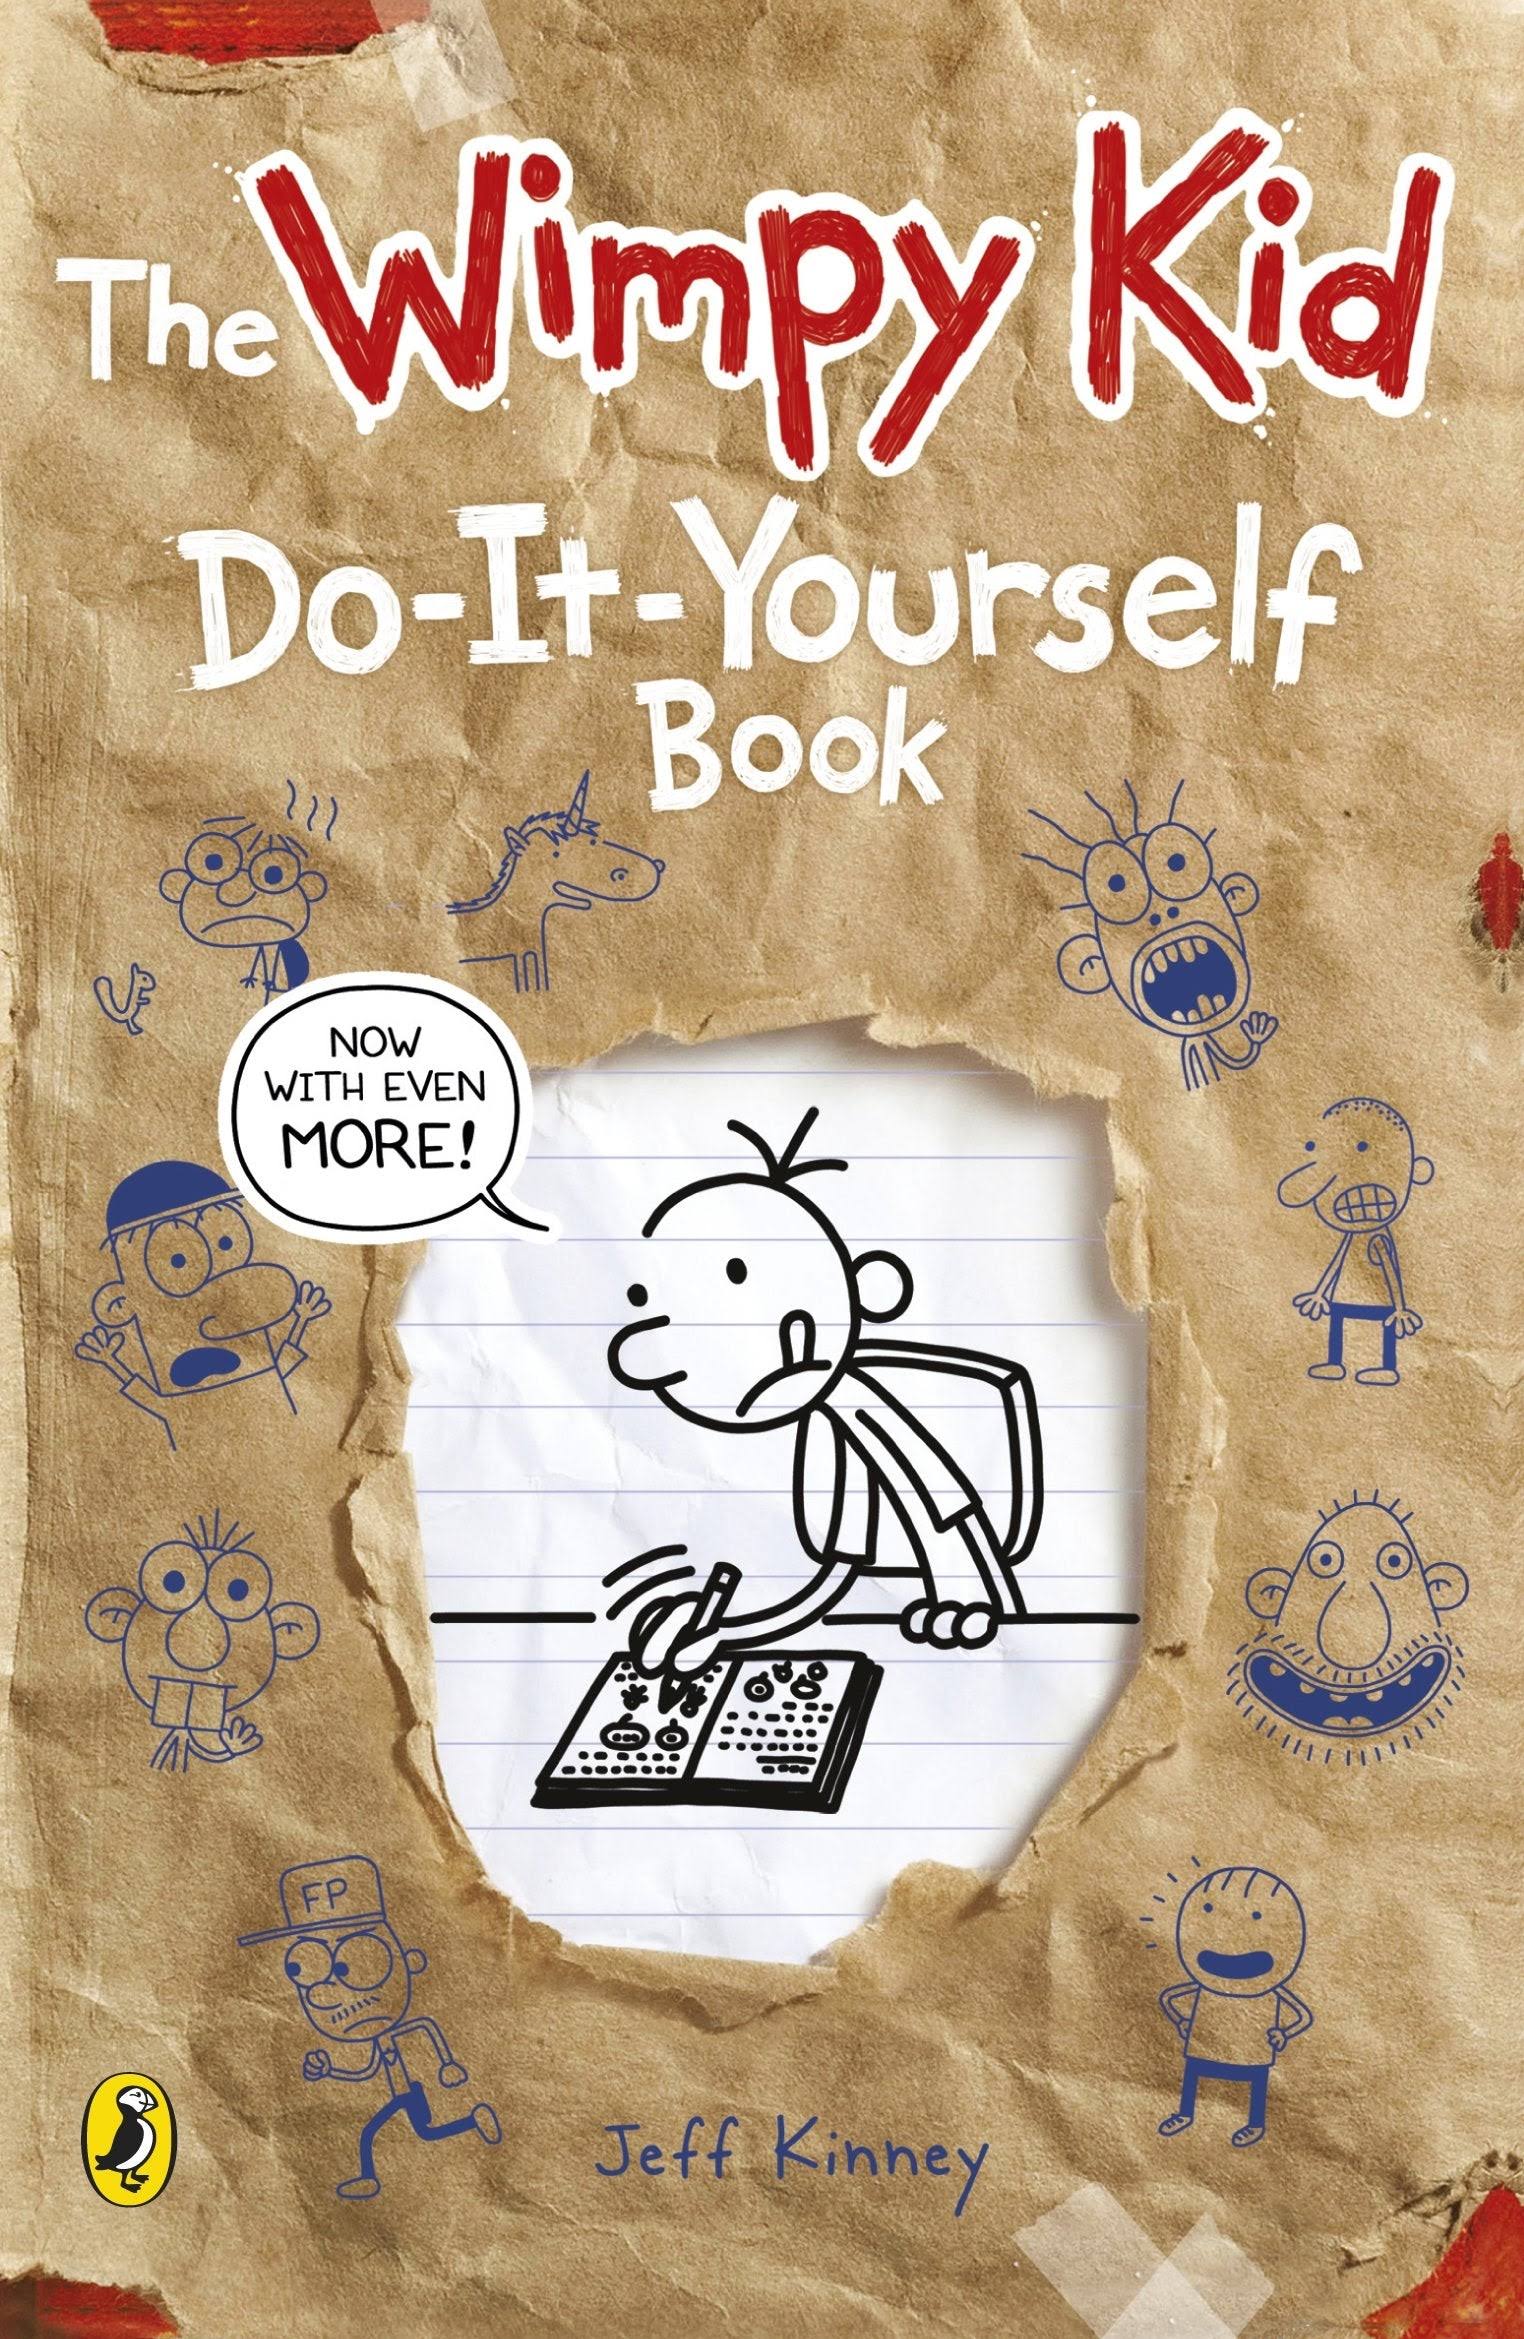 The Wimpy Kid: Do-it-yourself Book [Book]